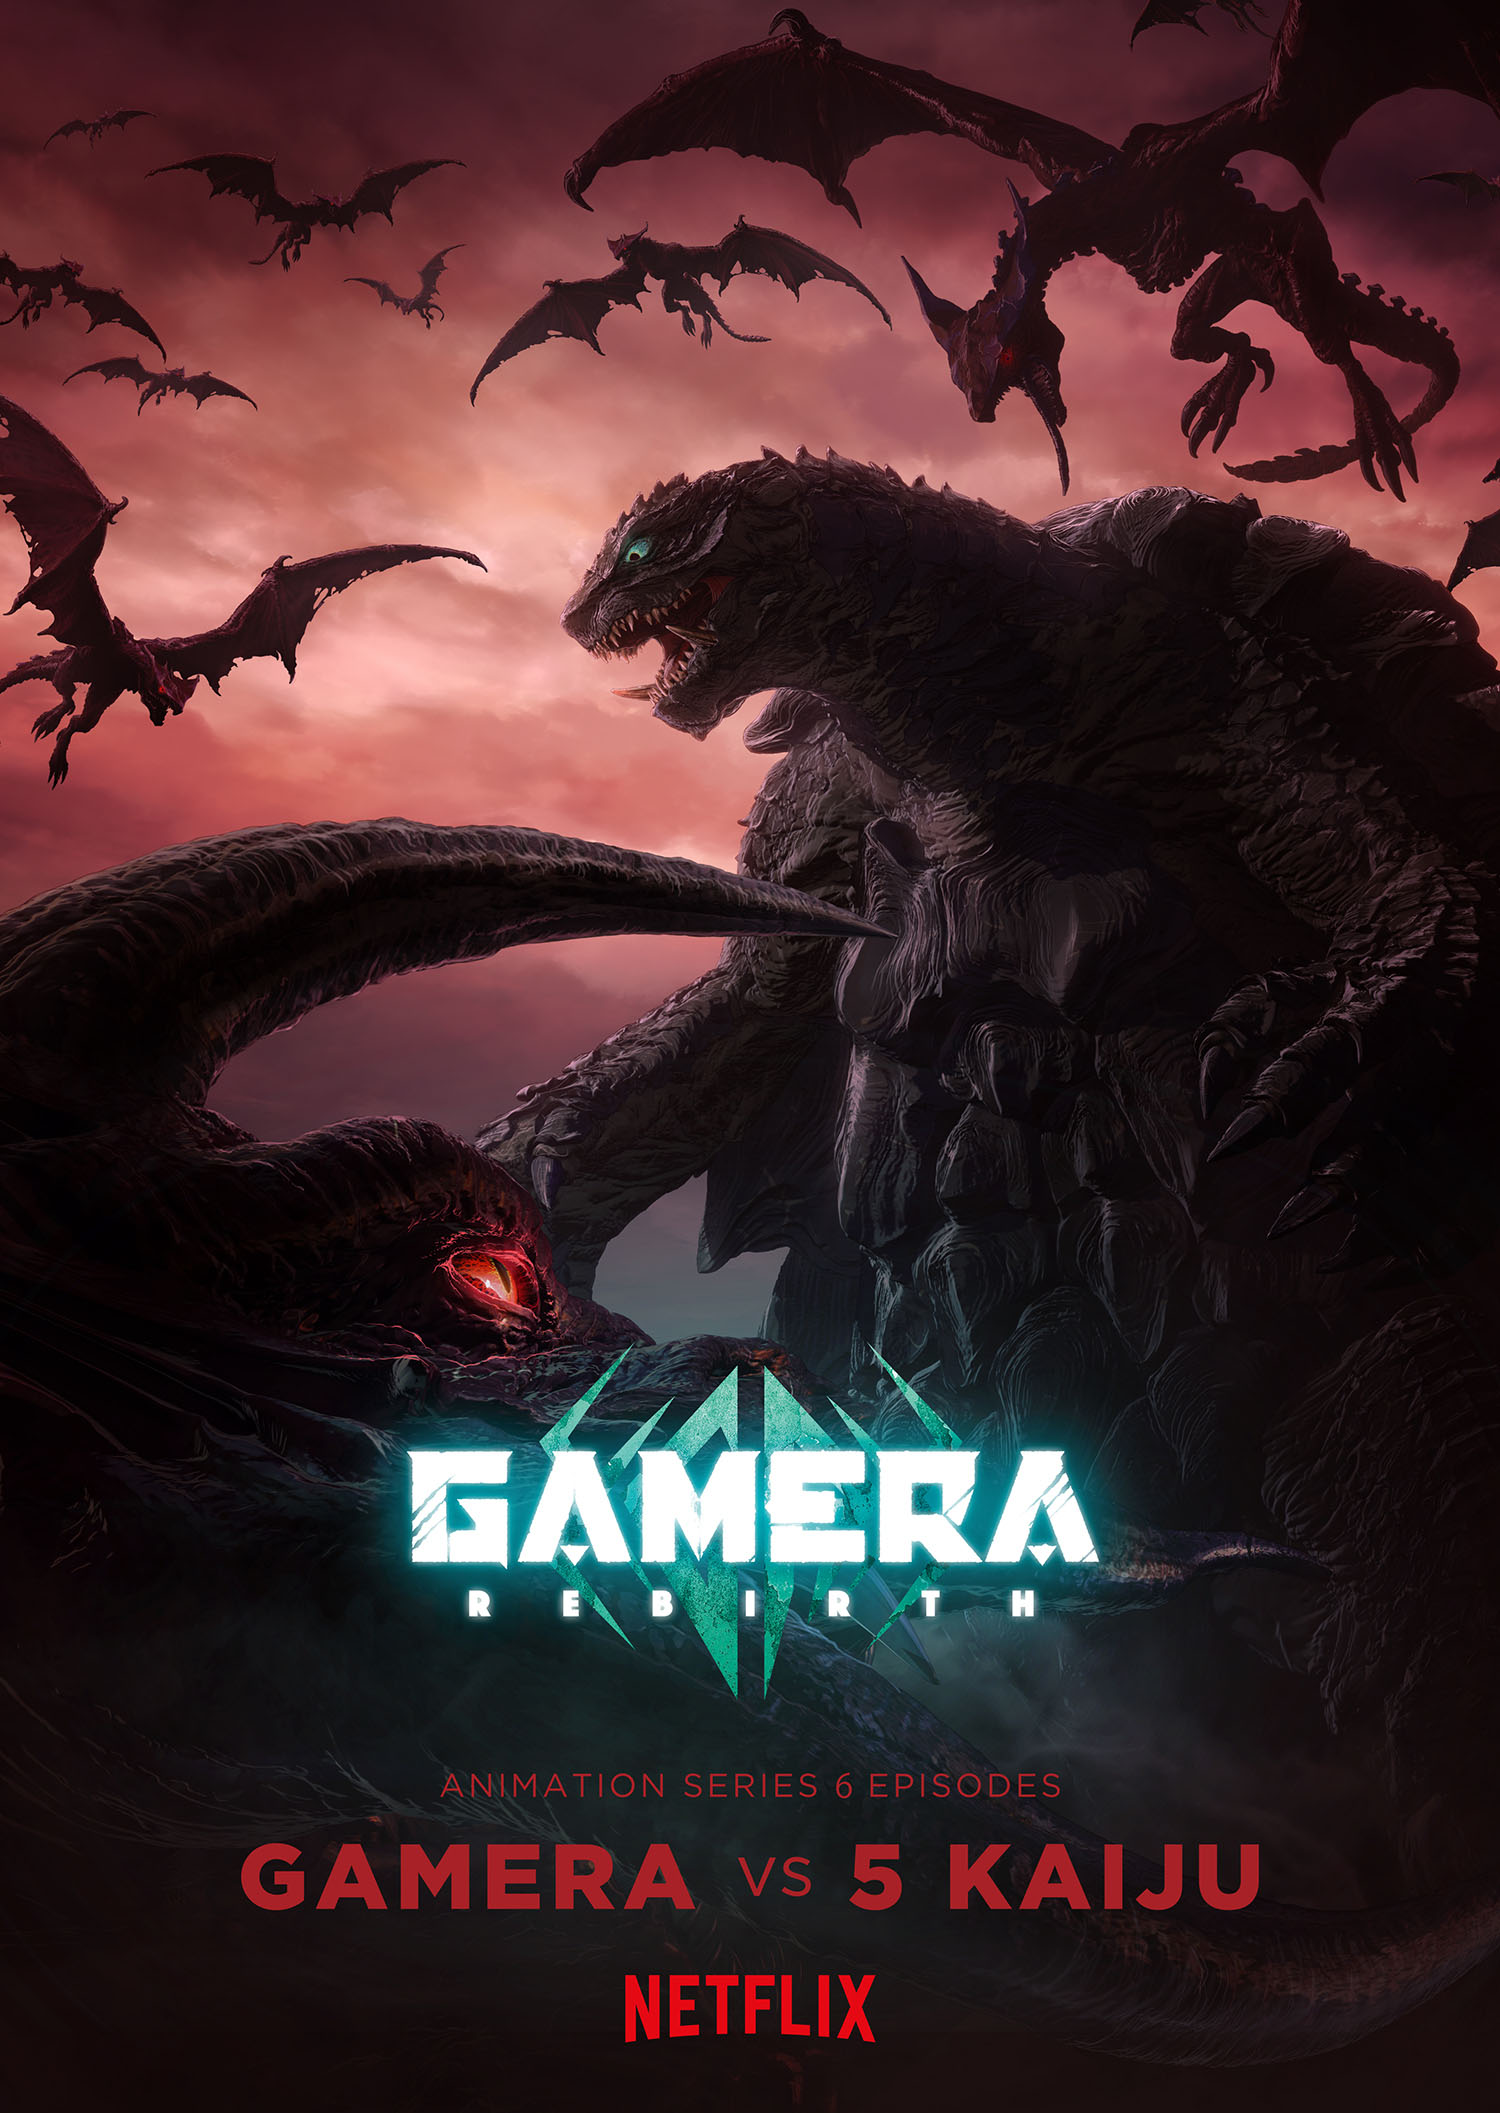 poster art for the Netflix series "Gamera: Rebirth." It depicts Gamera, the giant flying turtle from Japanese films, drawn in anime form against an apocalyptic/volcanic-looking backdrop on the right side of the vertical poster. We see him standing in a full-body shot as he faces monstrous adversaries attacking him from the air and the ground. Beneath the title "Gamera: Rebirth" in somewhat glowing letters, is the following, in red lettering: "Animation Series 6 Episodes" Below that reads "Gamera vs. 5 Kaiju" and below that is the Netflix logo.